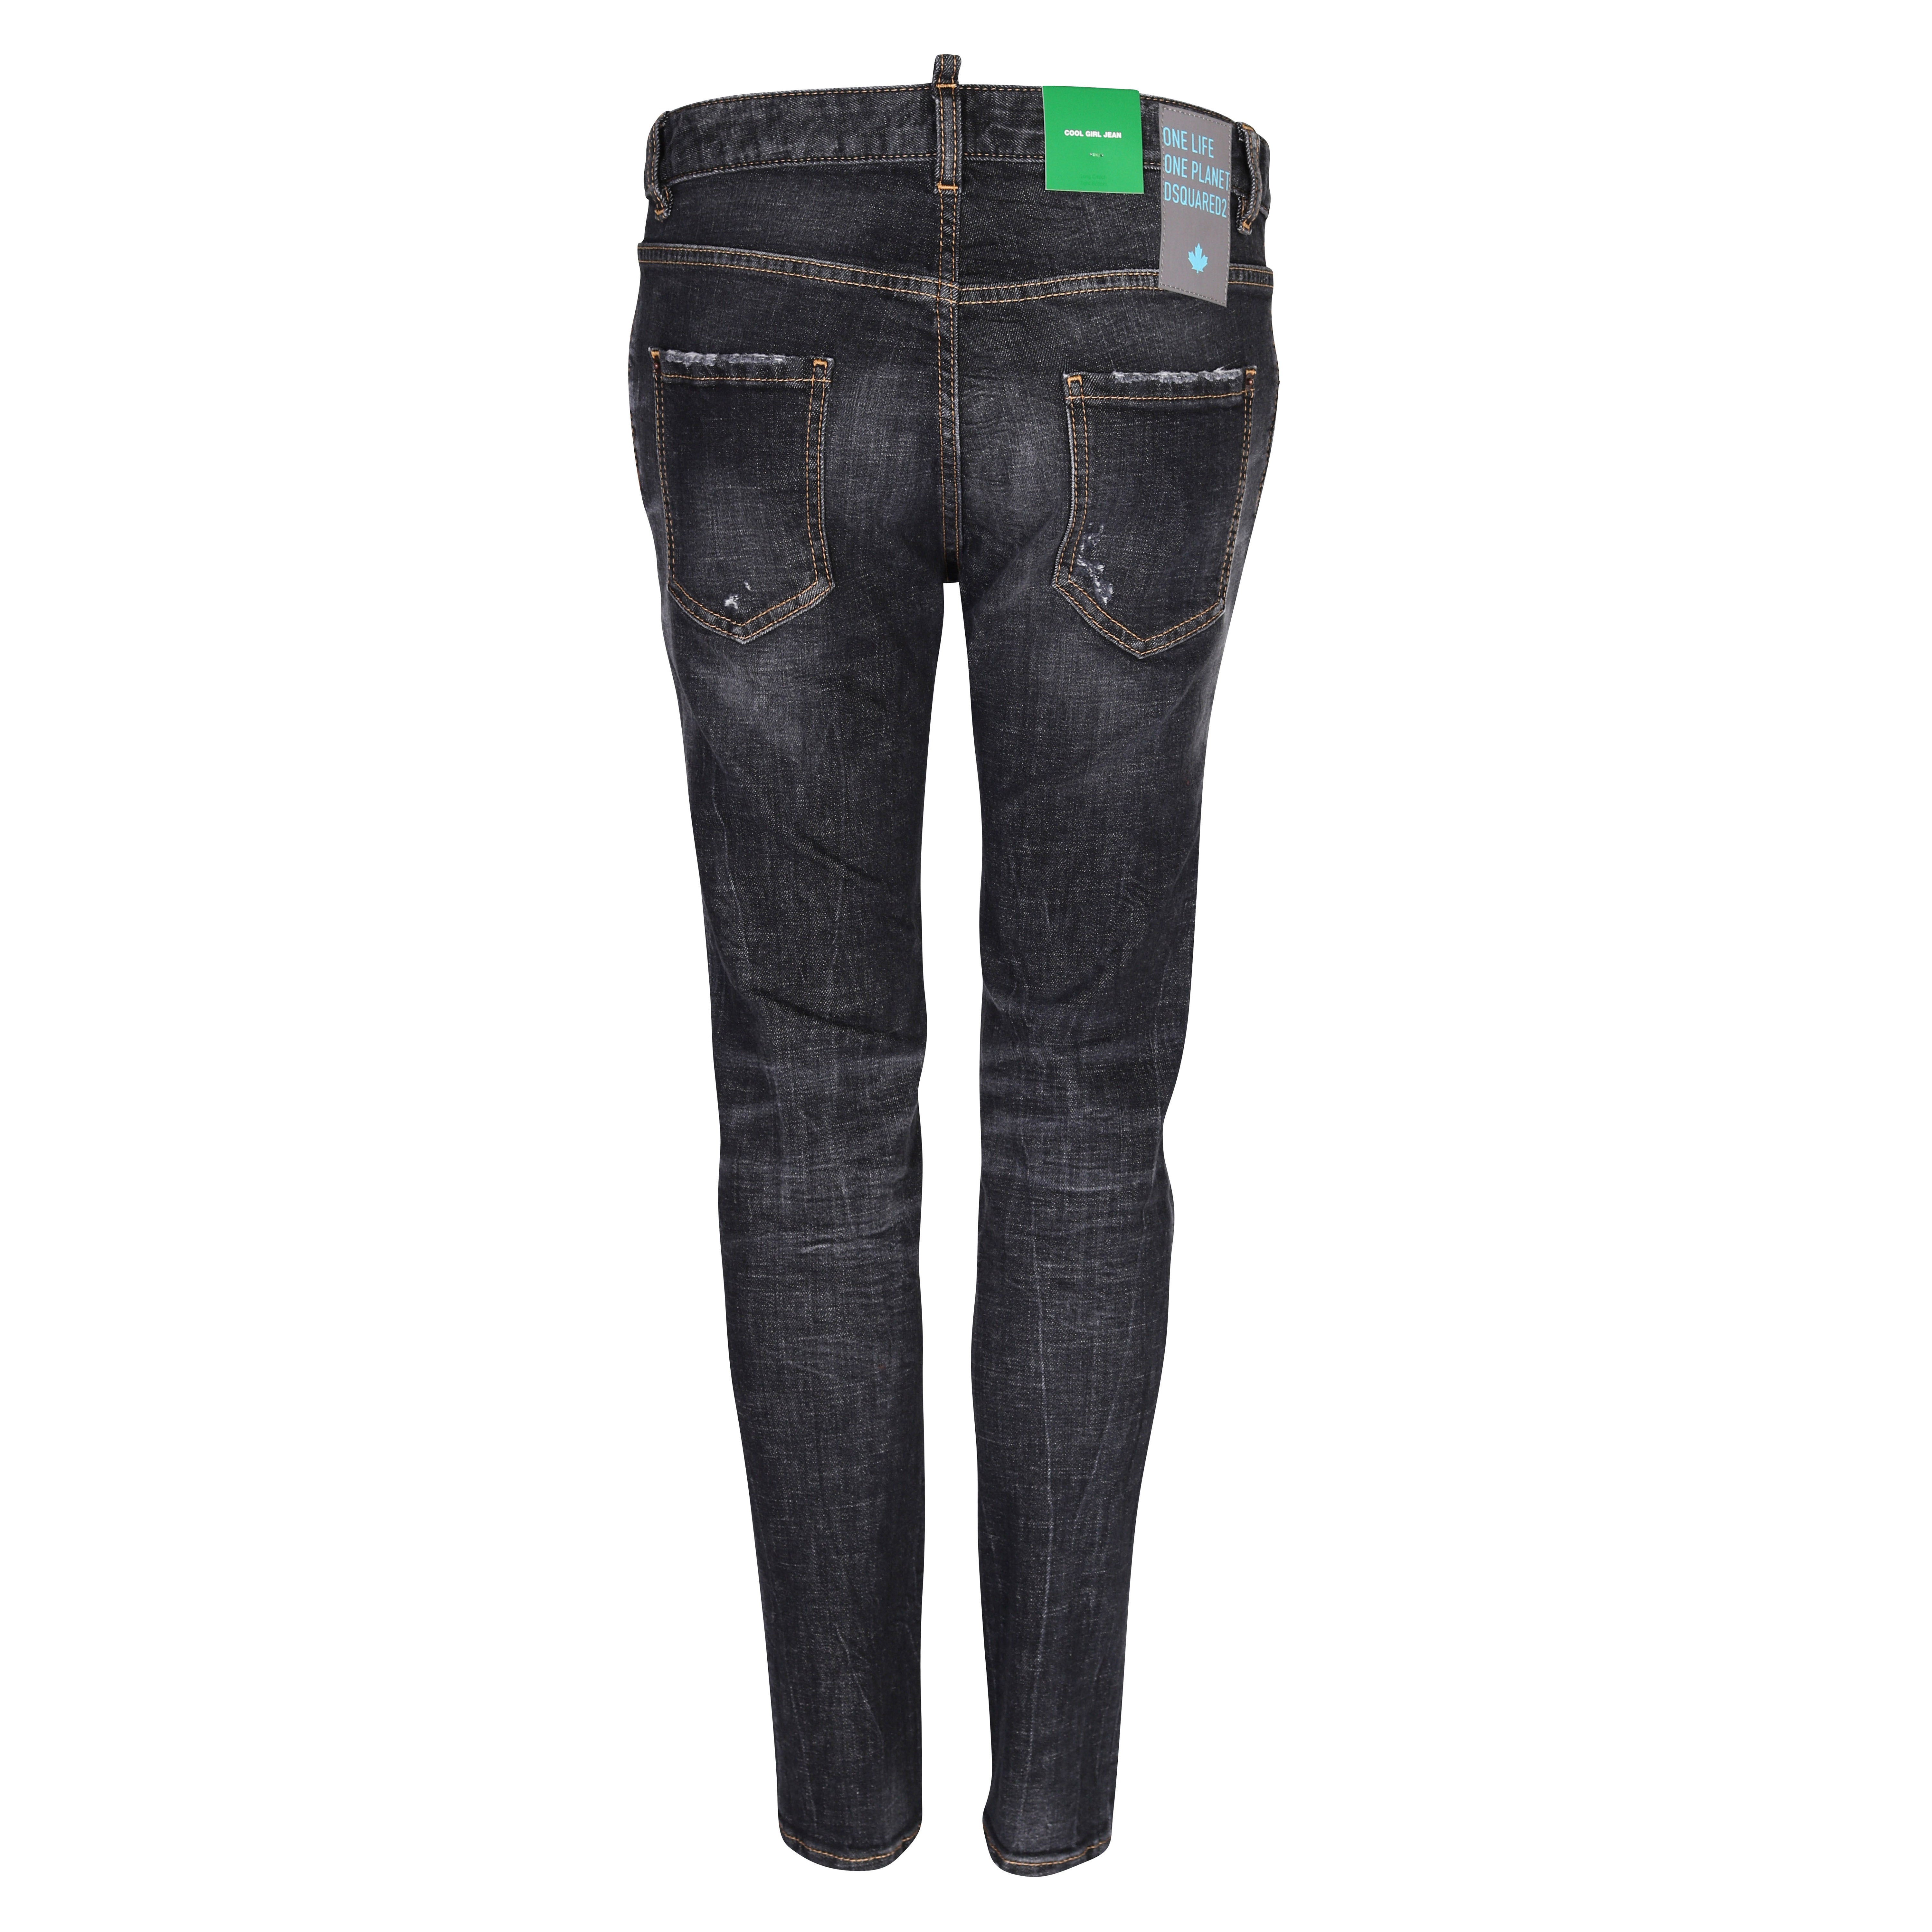 DSQUARED2 Green Label Cool Girl Jeans in Washed Black IT 38 / DE 32